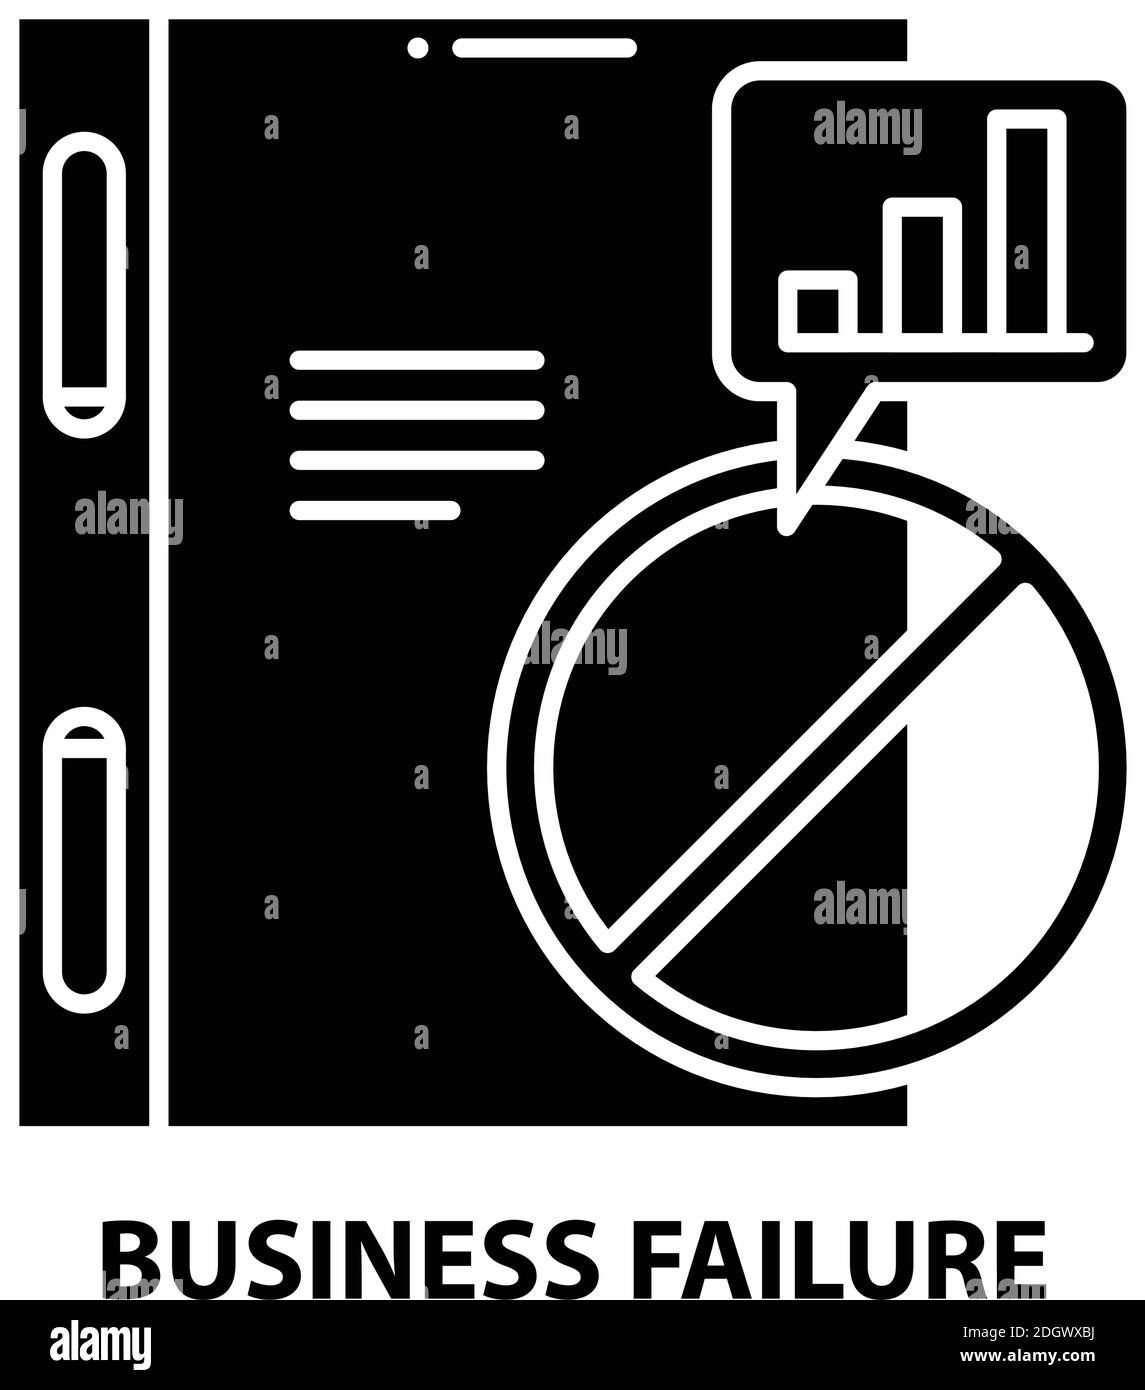 business failure icon, black vector sign with editable strokes, concept illustration Stock Vector